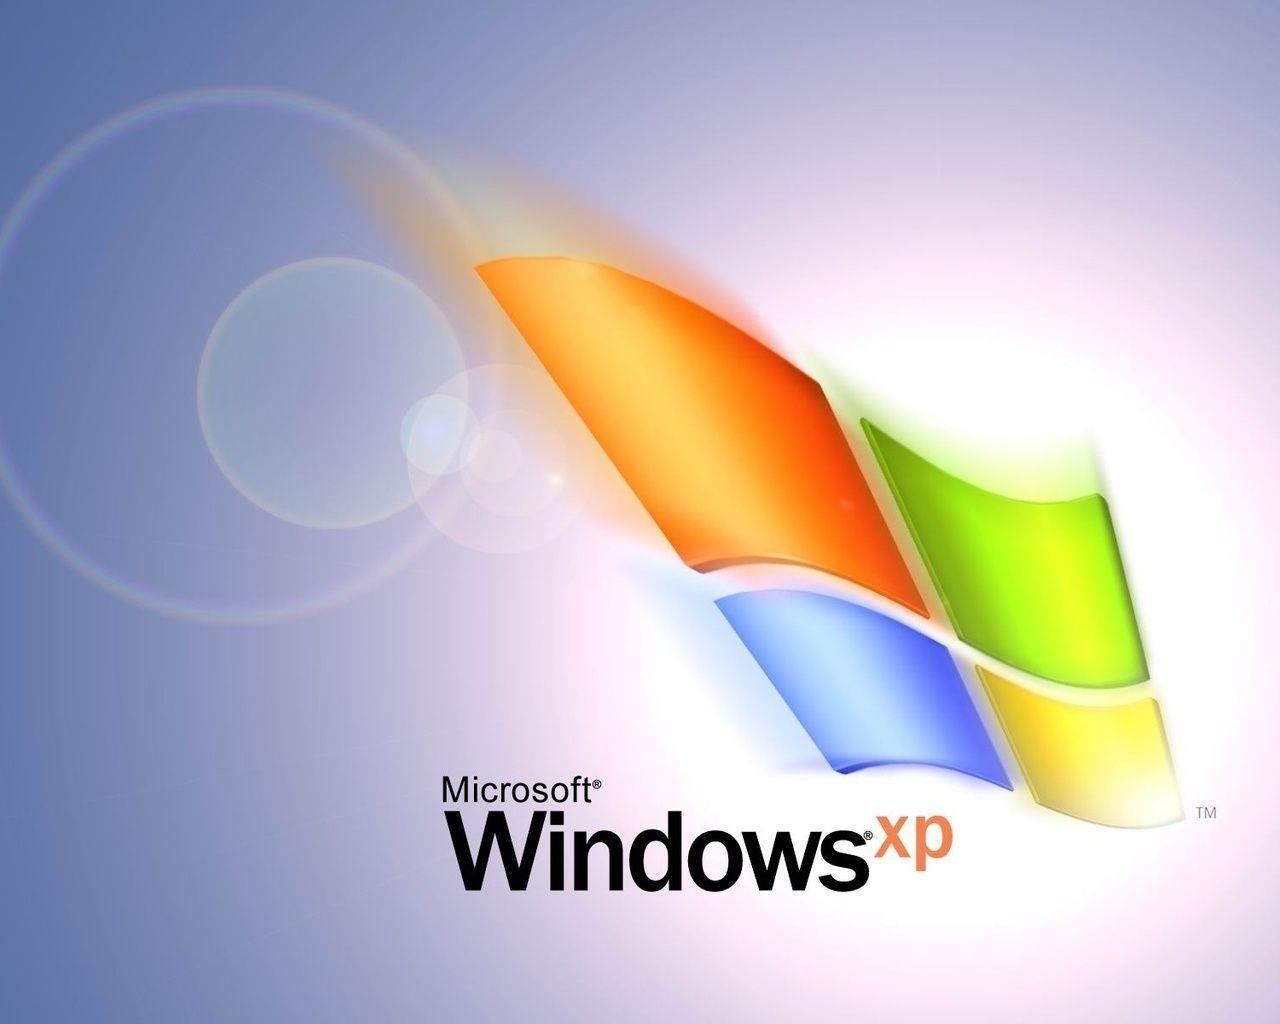 Free Wallpapers For Windows Xp - Wallpaper Cave